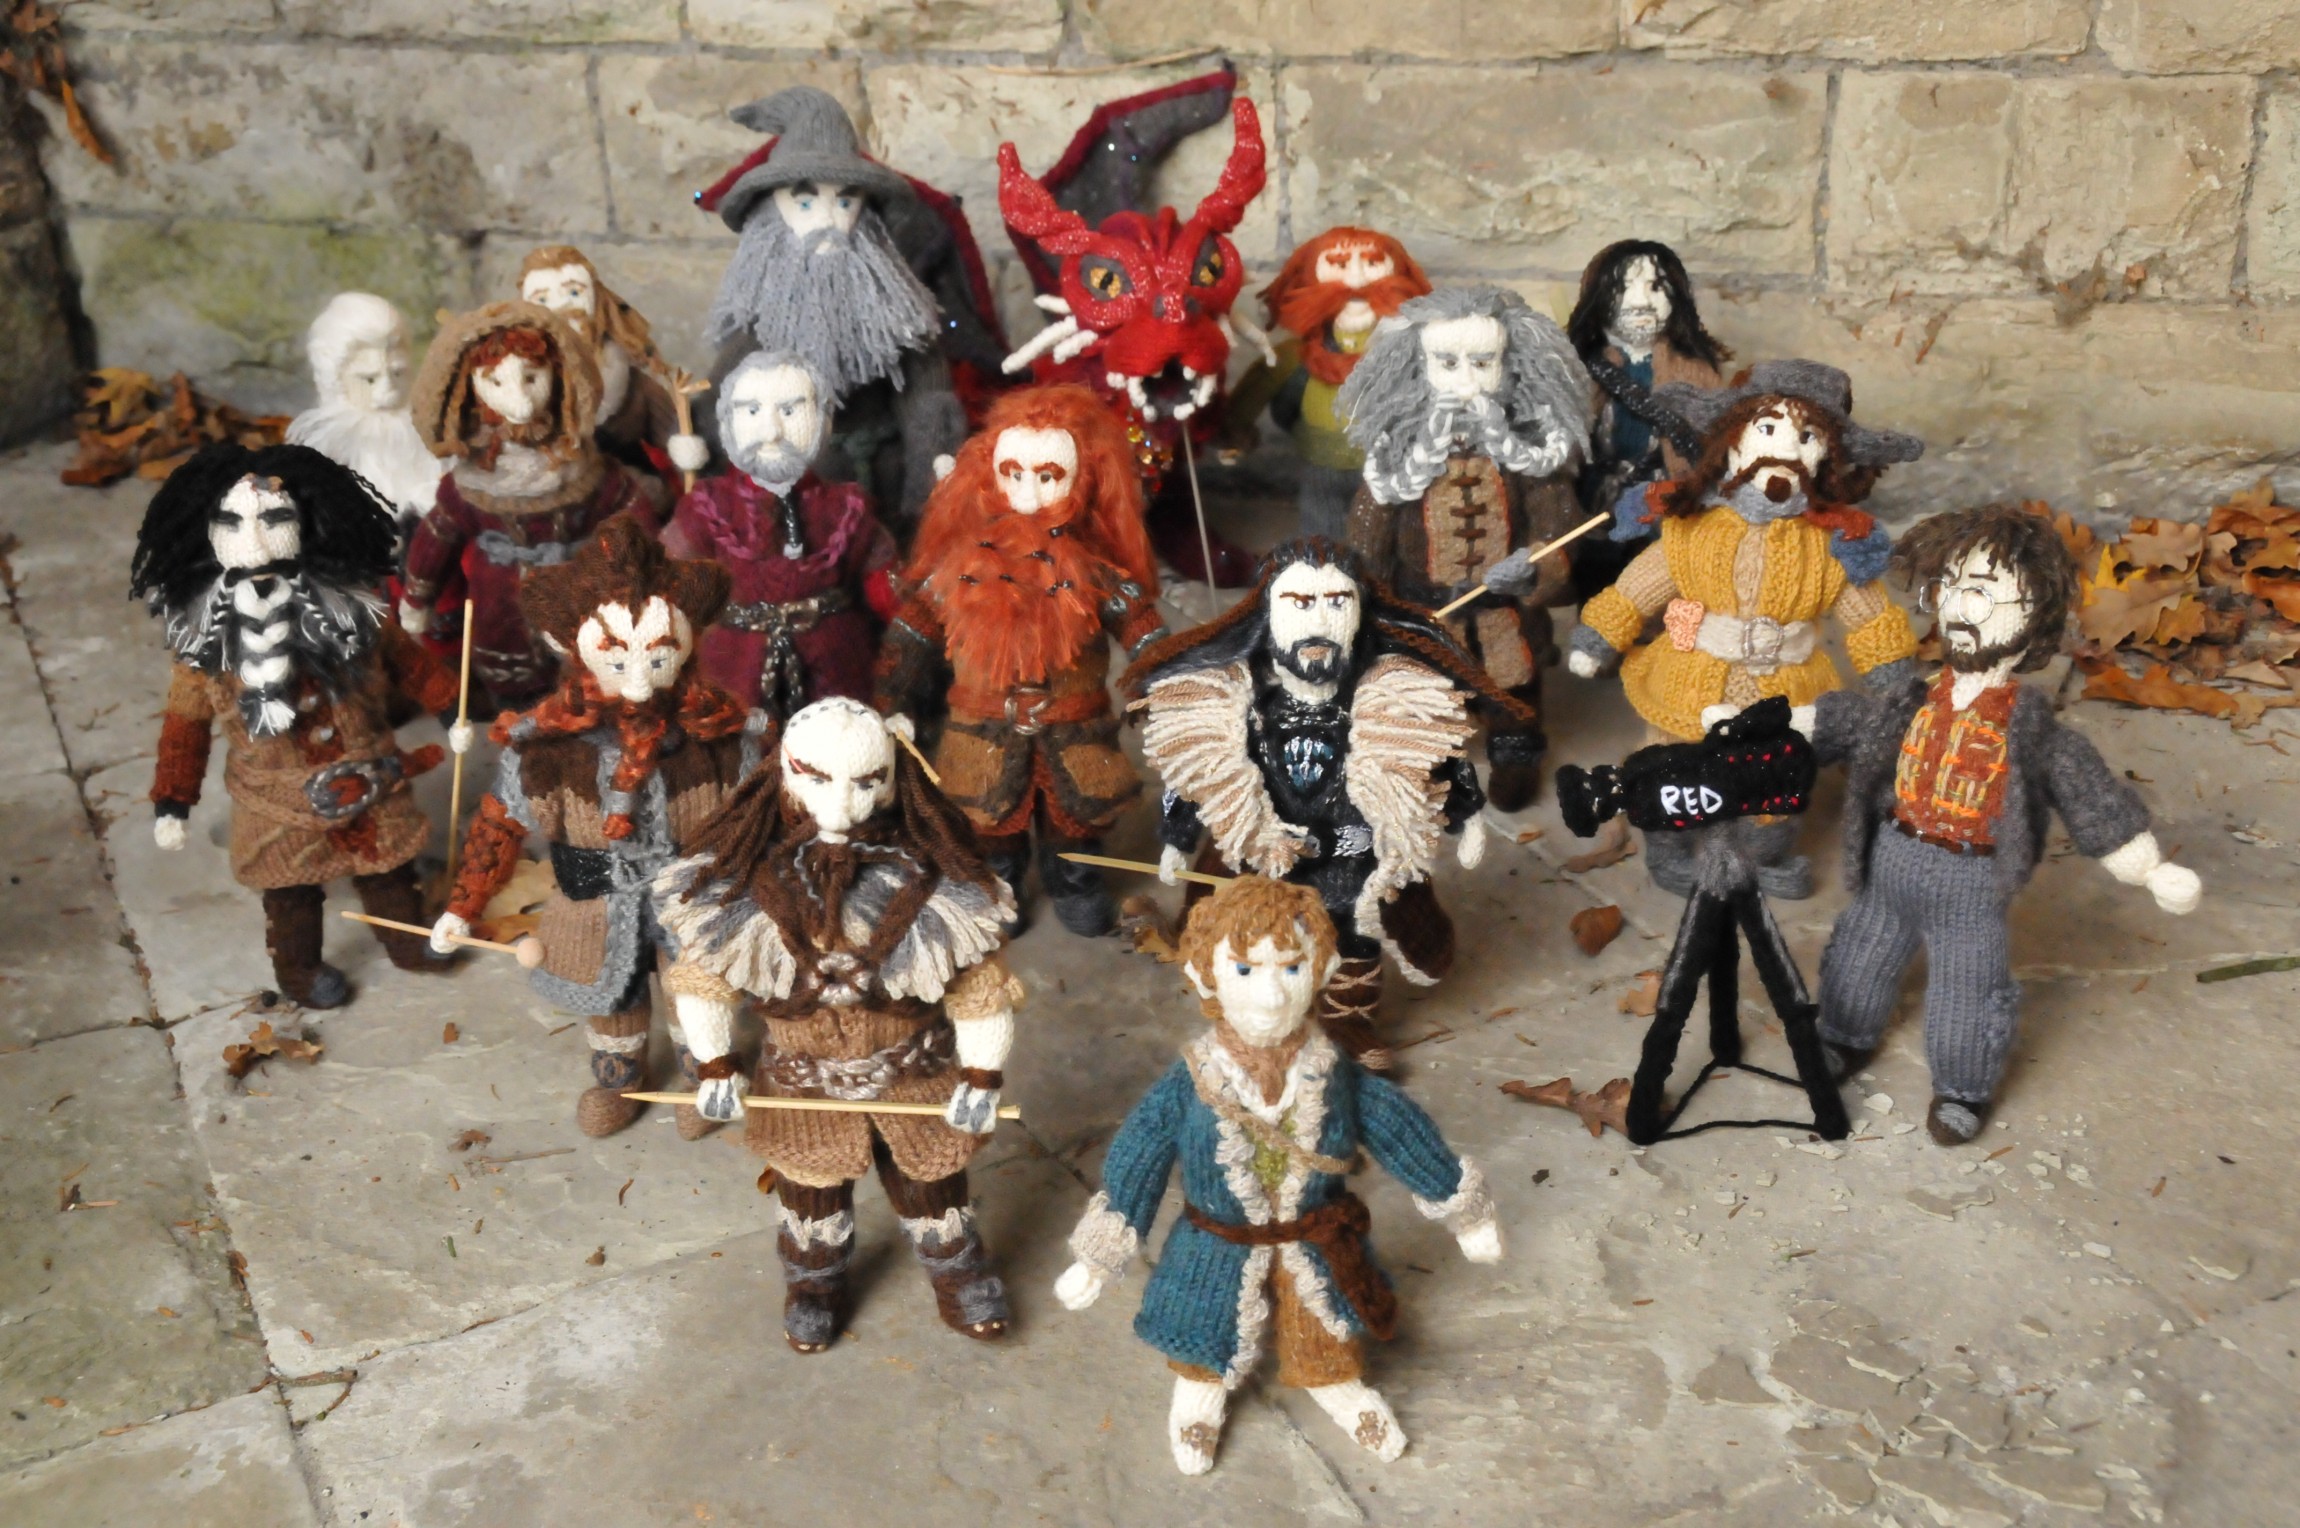 The Fellowship of the Knits: Lord of the Rings